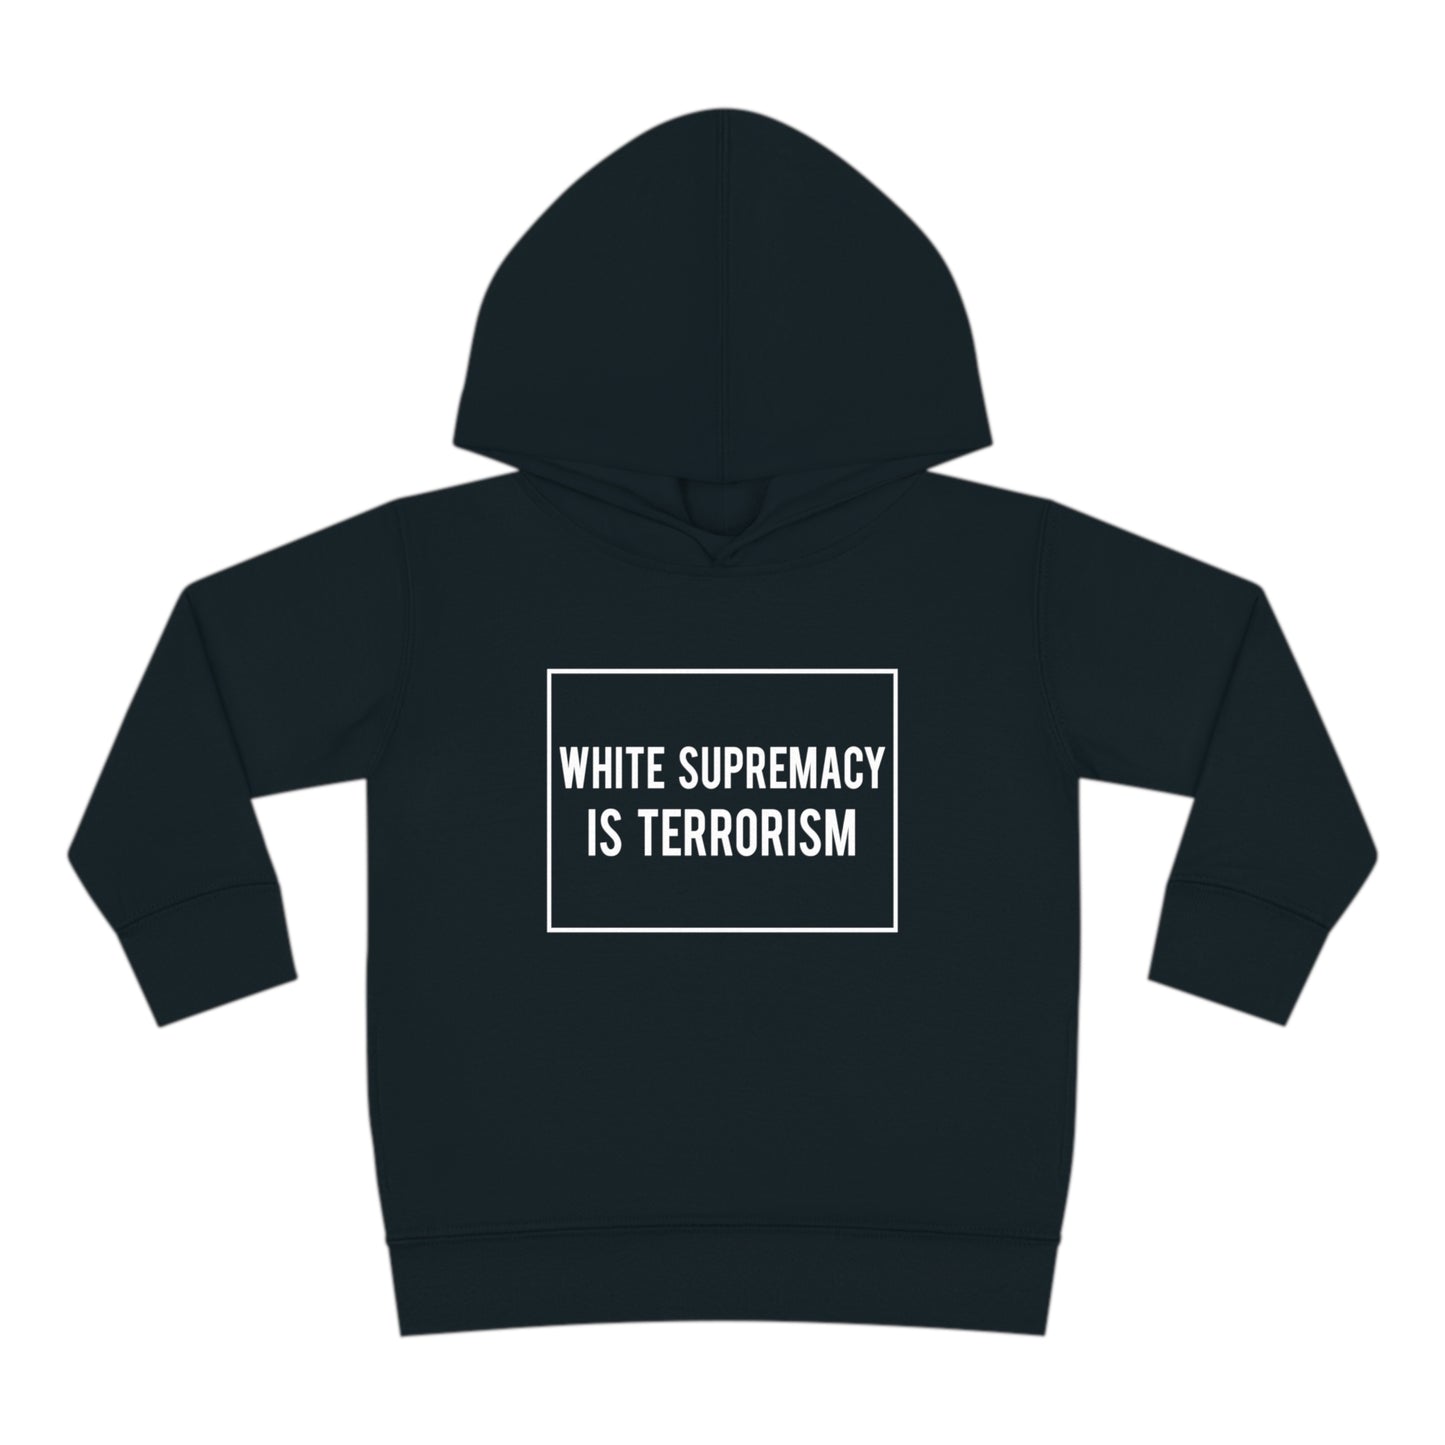 “White Supremacy is Terrorism” Toddler Hoodie